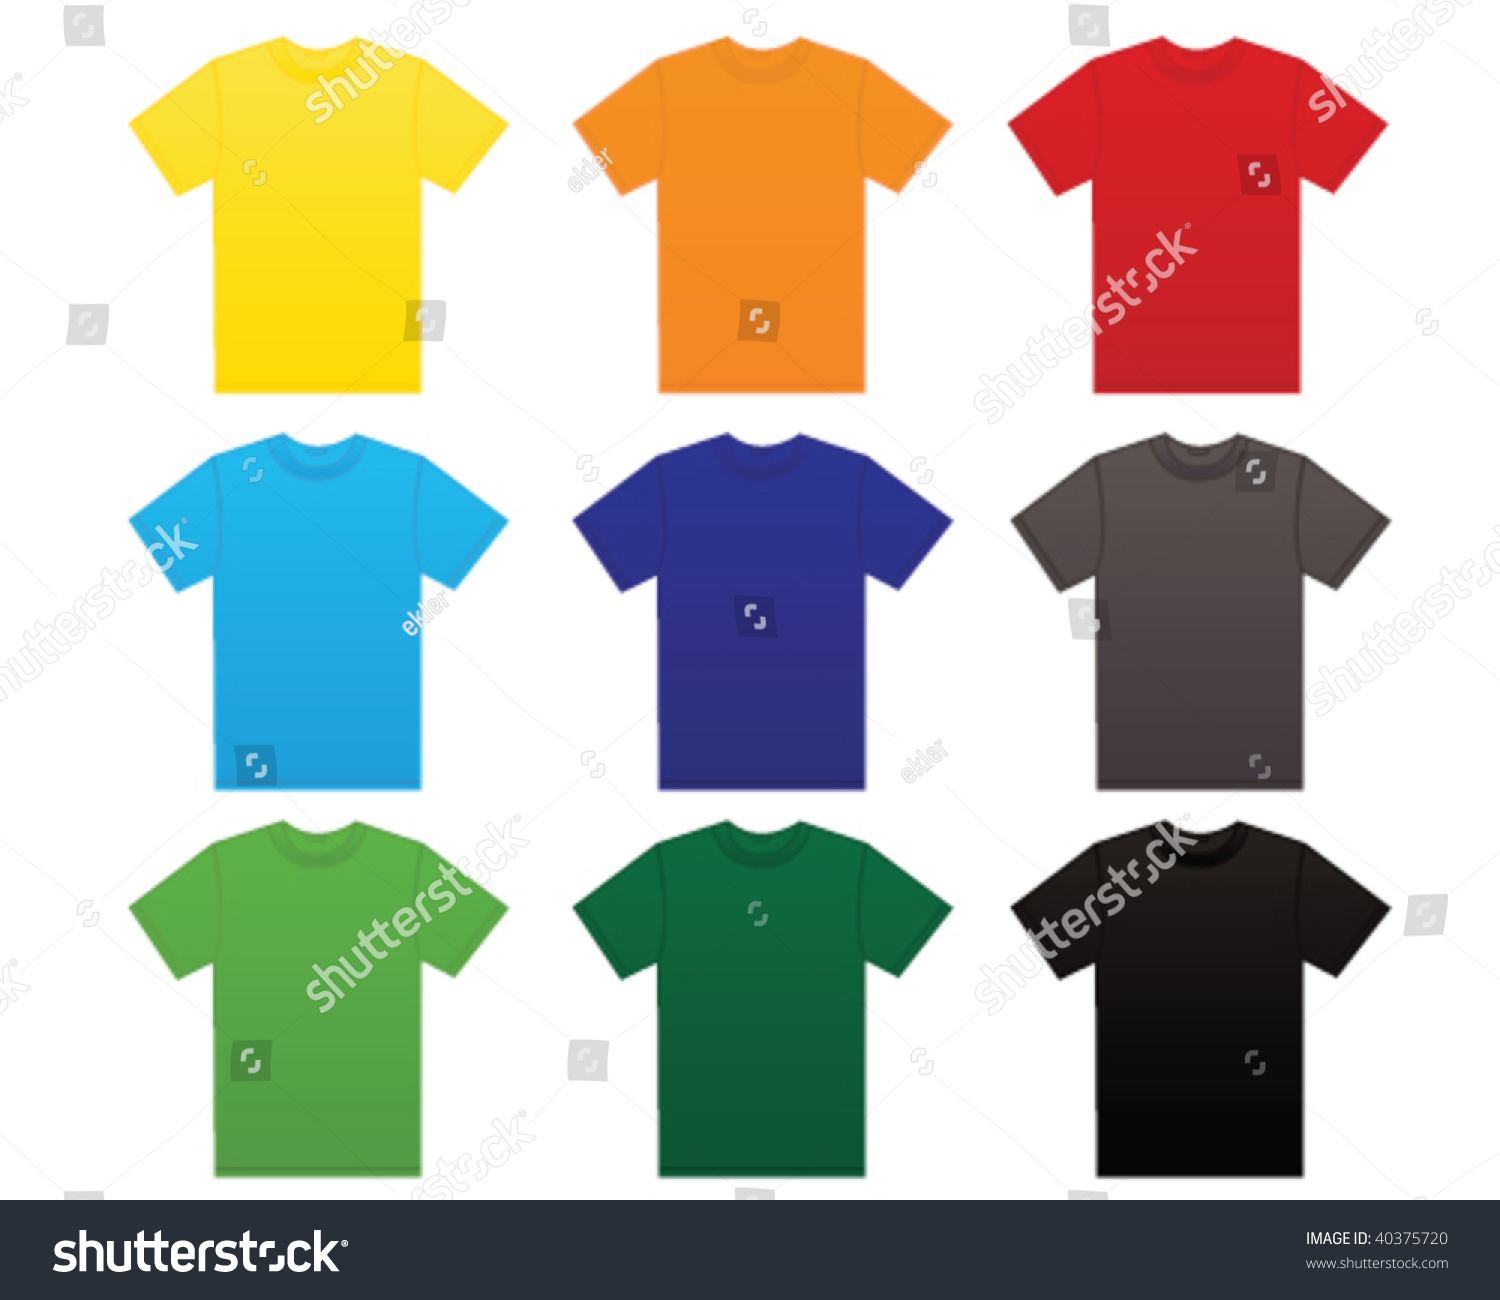 T Shirt In Different Colors Stock Vector Illustration 40375720 ...